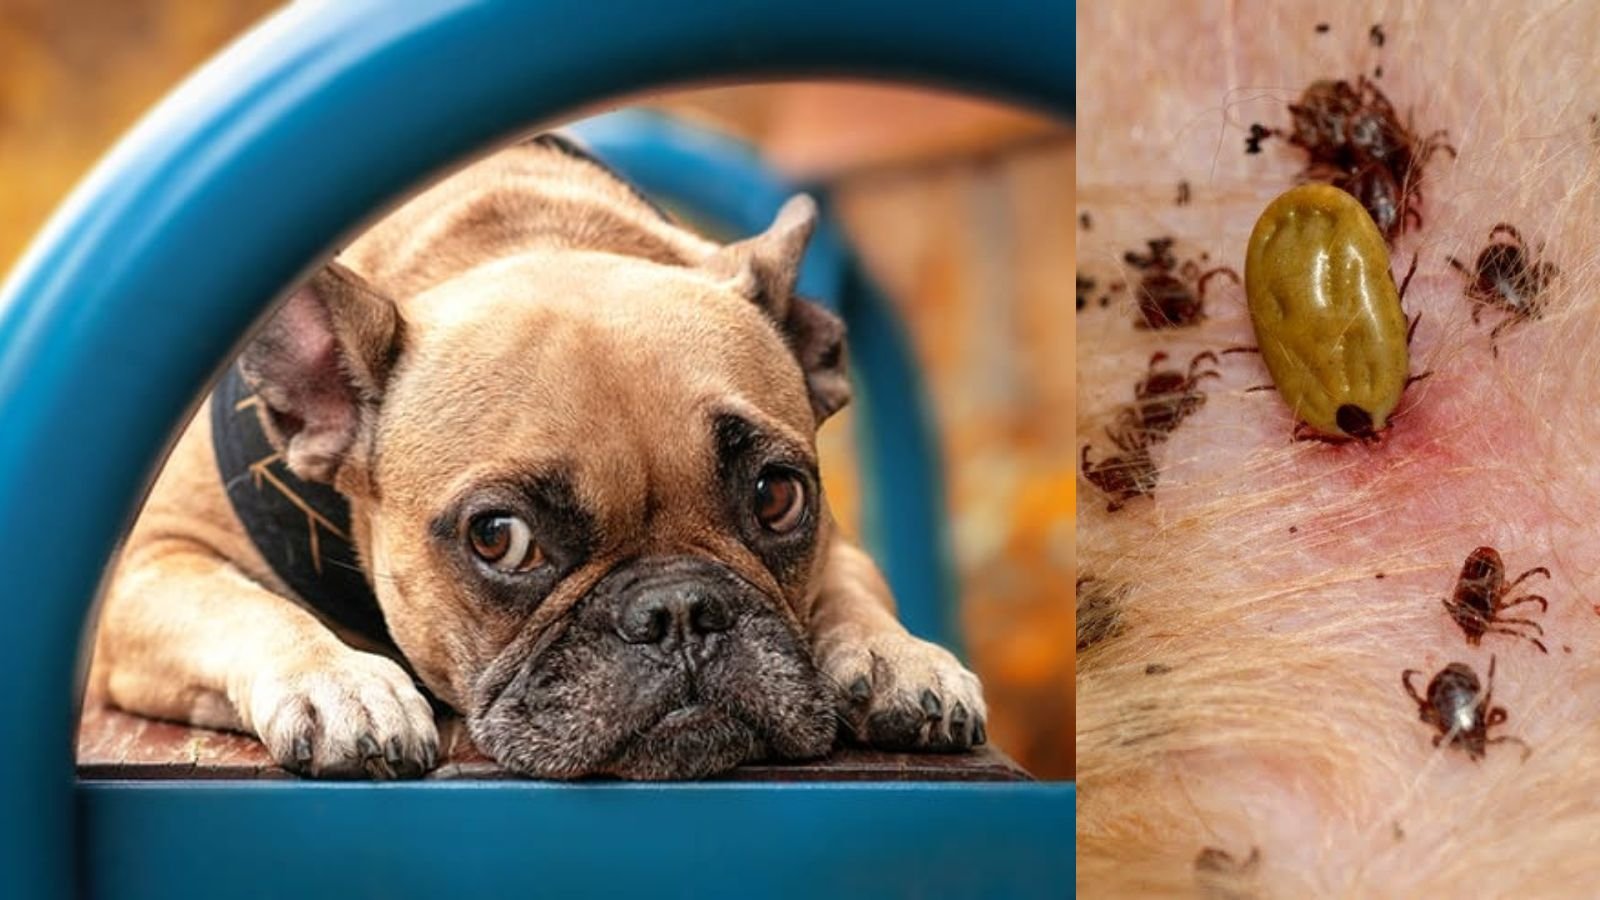 How Do You Know If Your Dog Has Lyme Disease